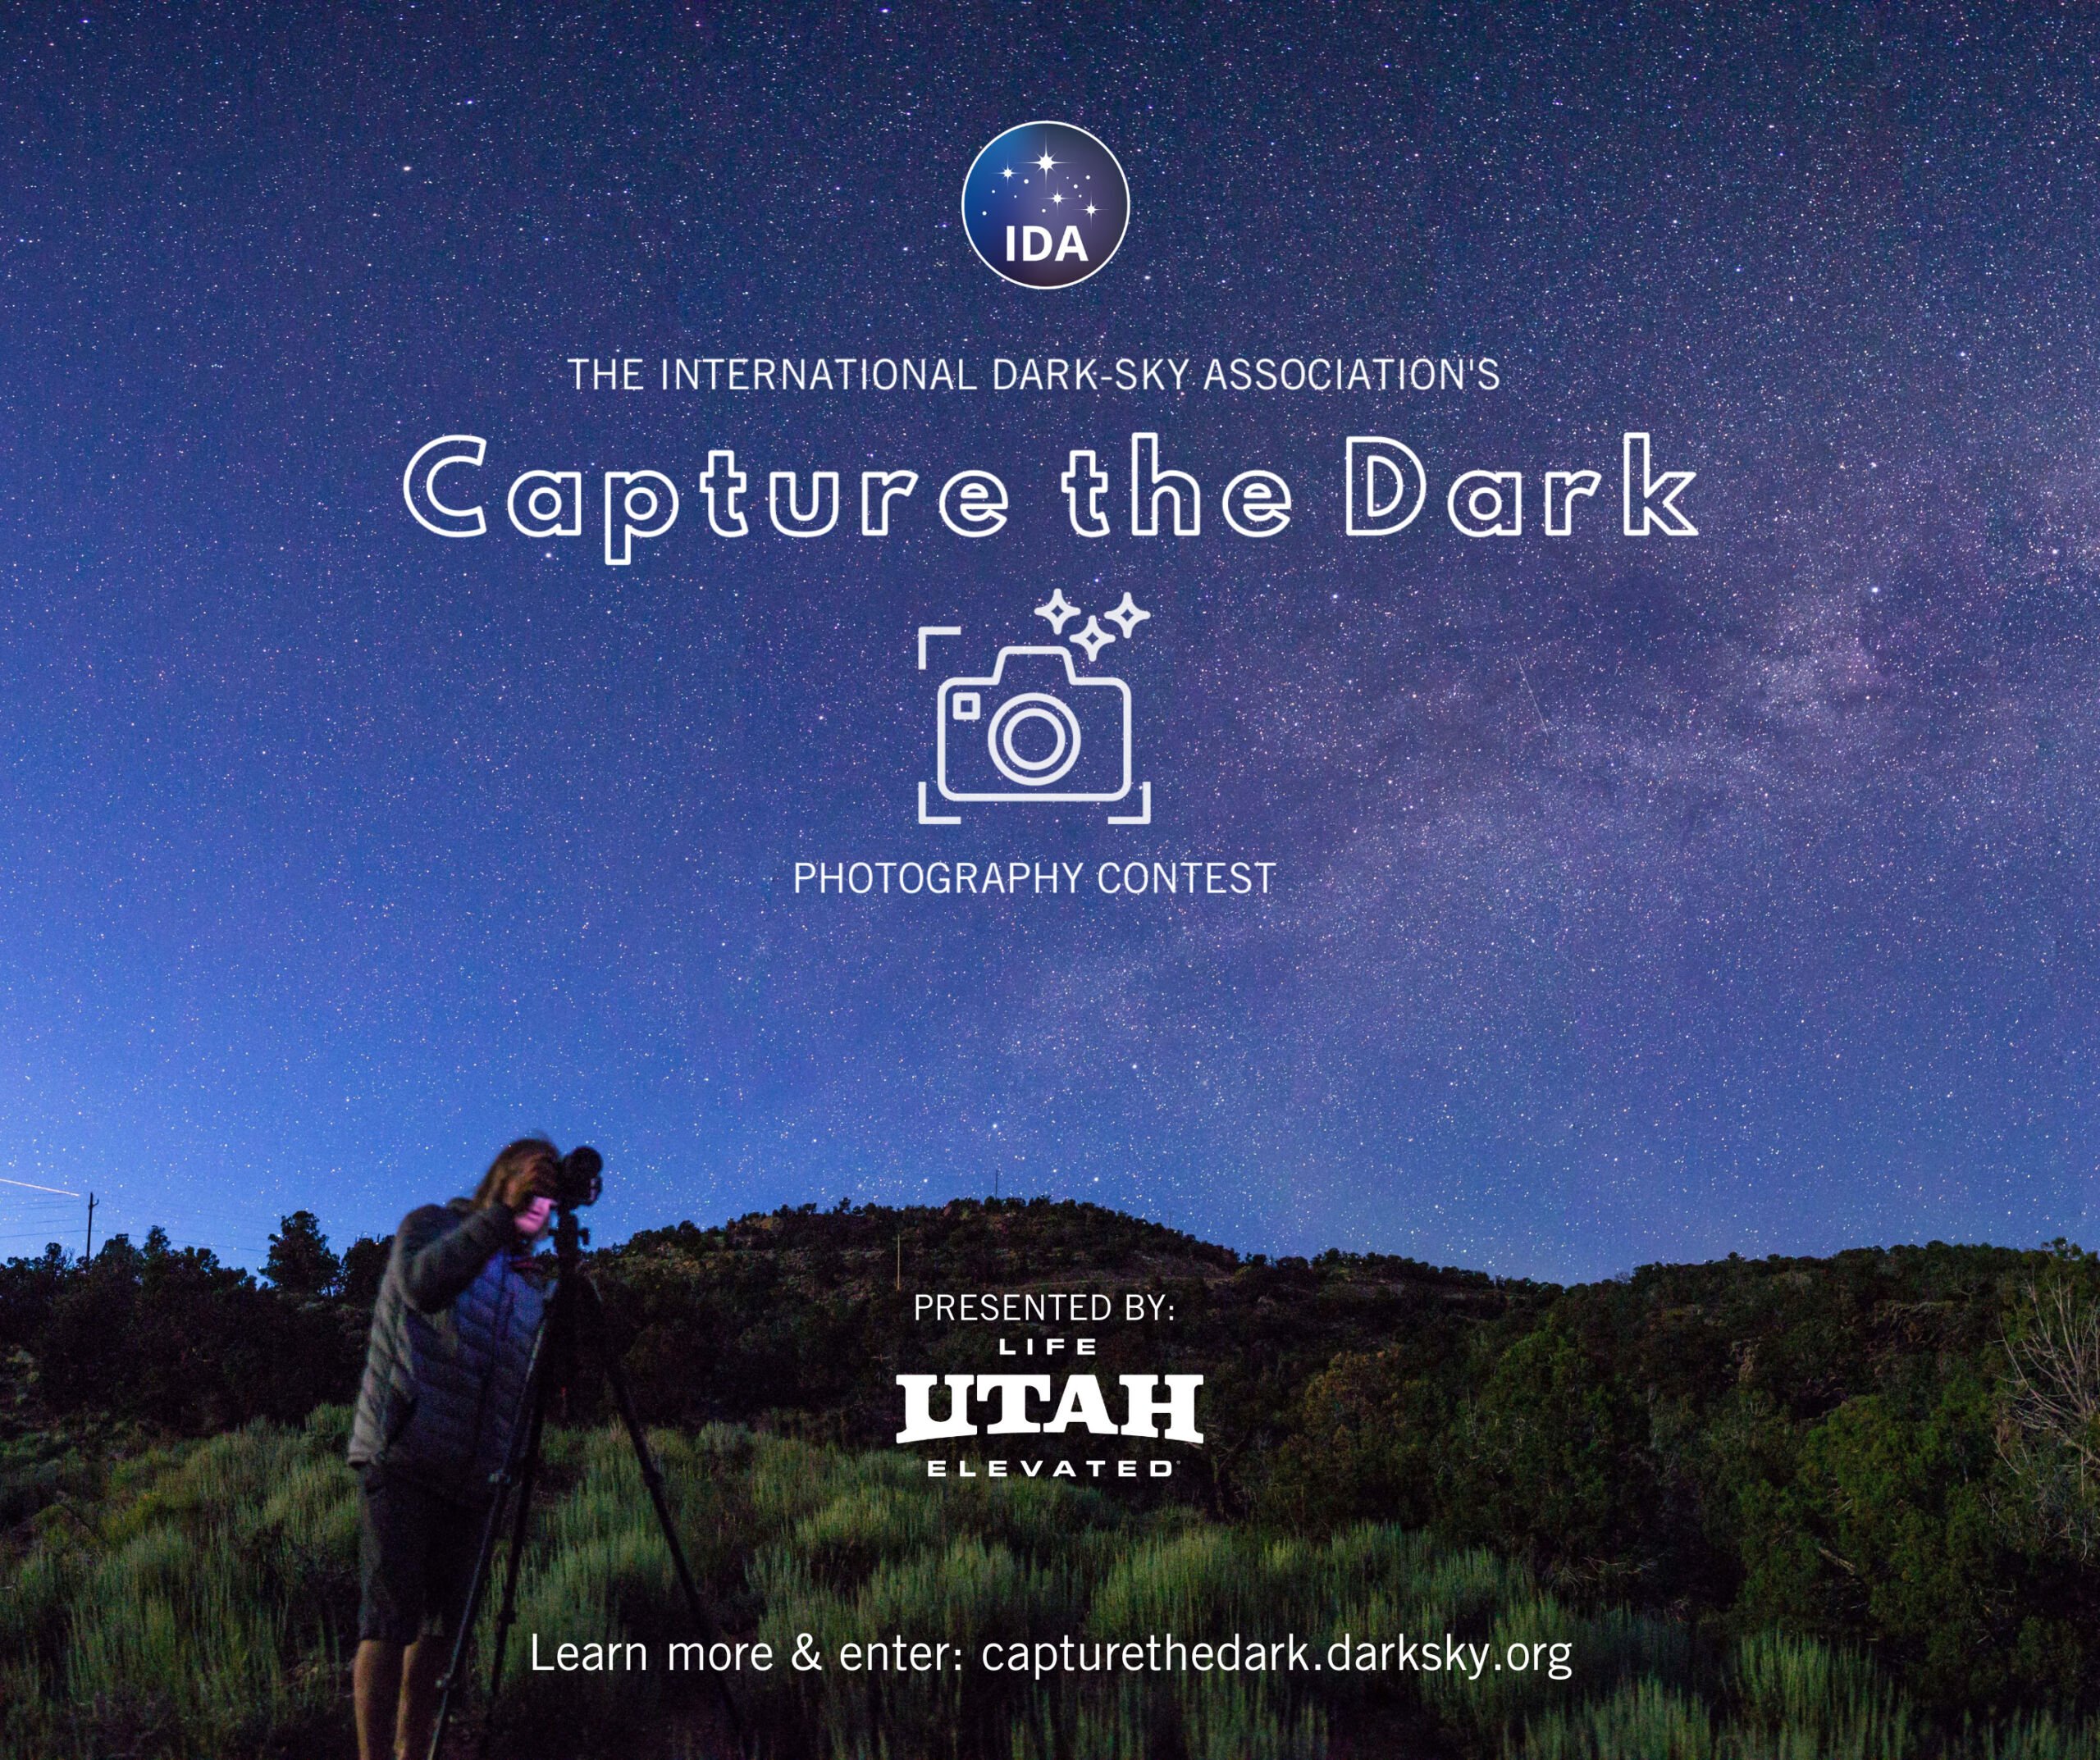 International Dark-Sky Association Aims to Raise Awareness About Light Pollution by Hosting Third Annual Capture the Dark Photography Contest Image